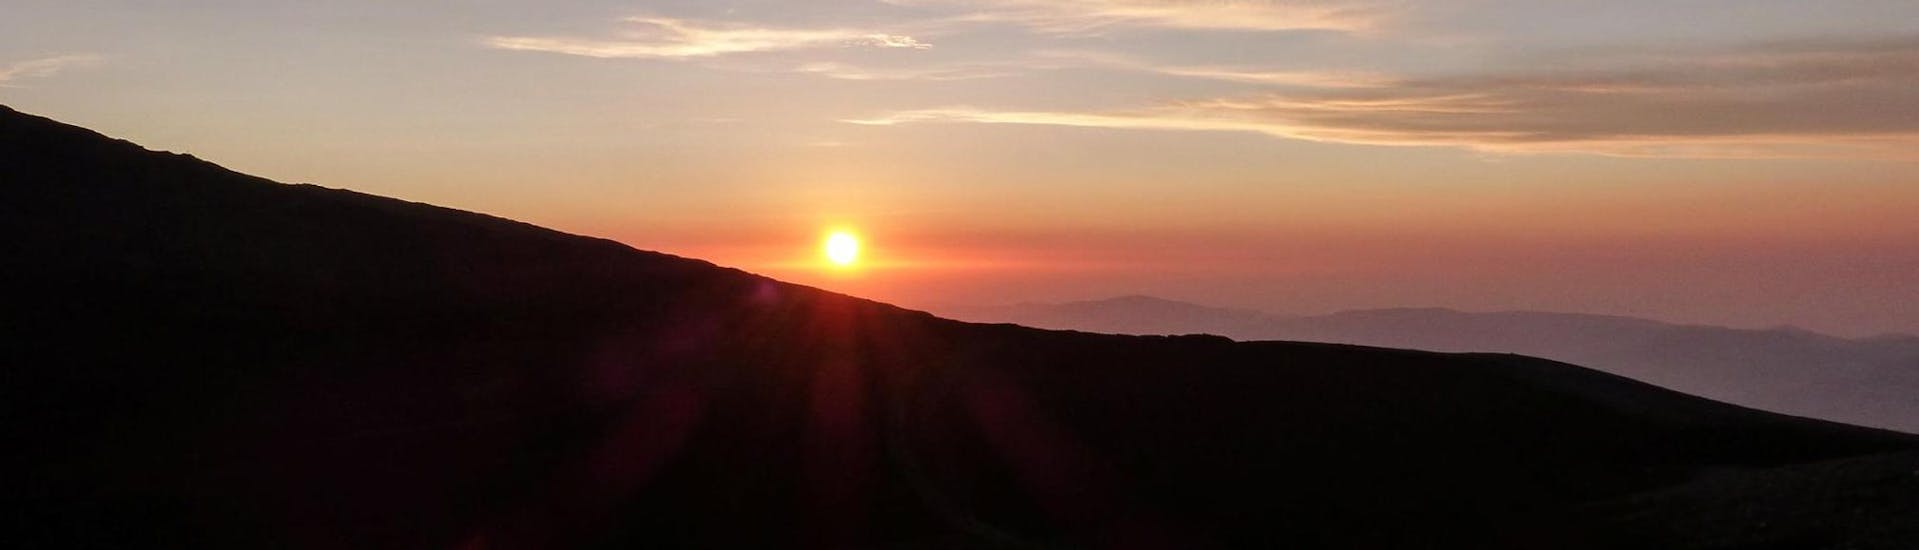 The sun sets behind a slope during the Sunset Excursion to Mount Etna from Taormina with SAT excursions Taormina.